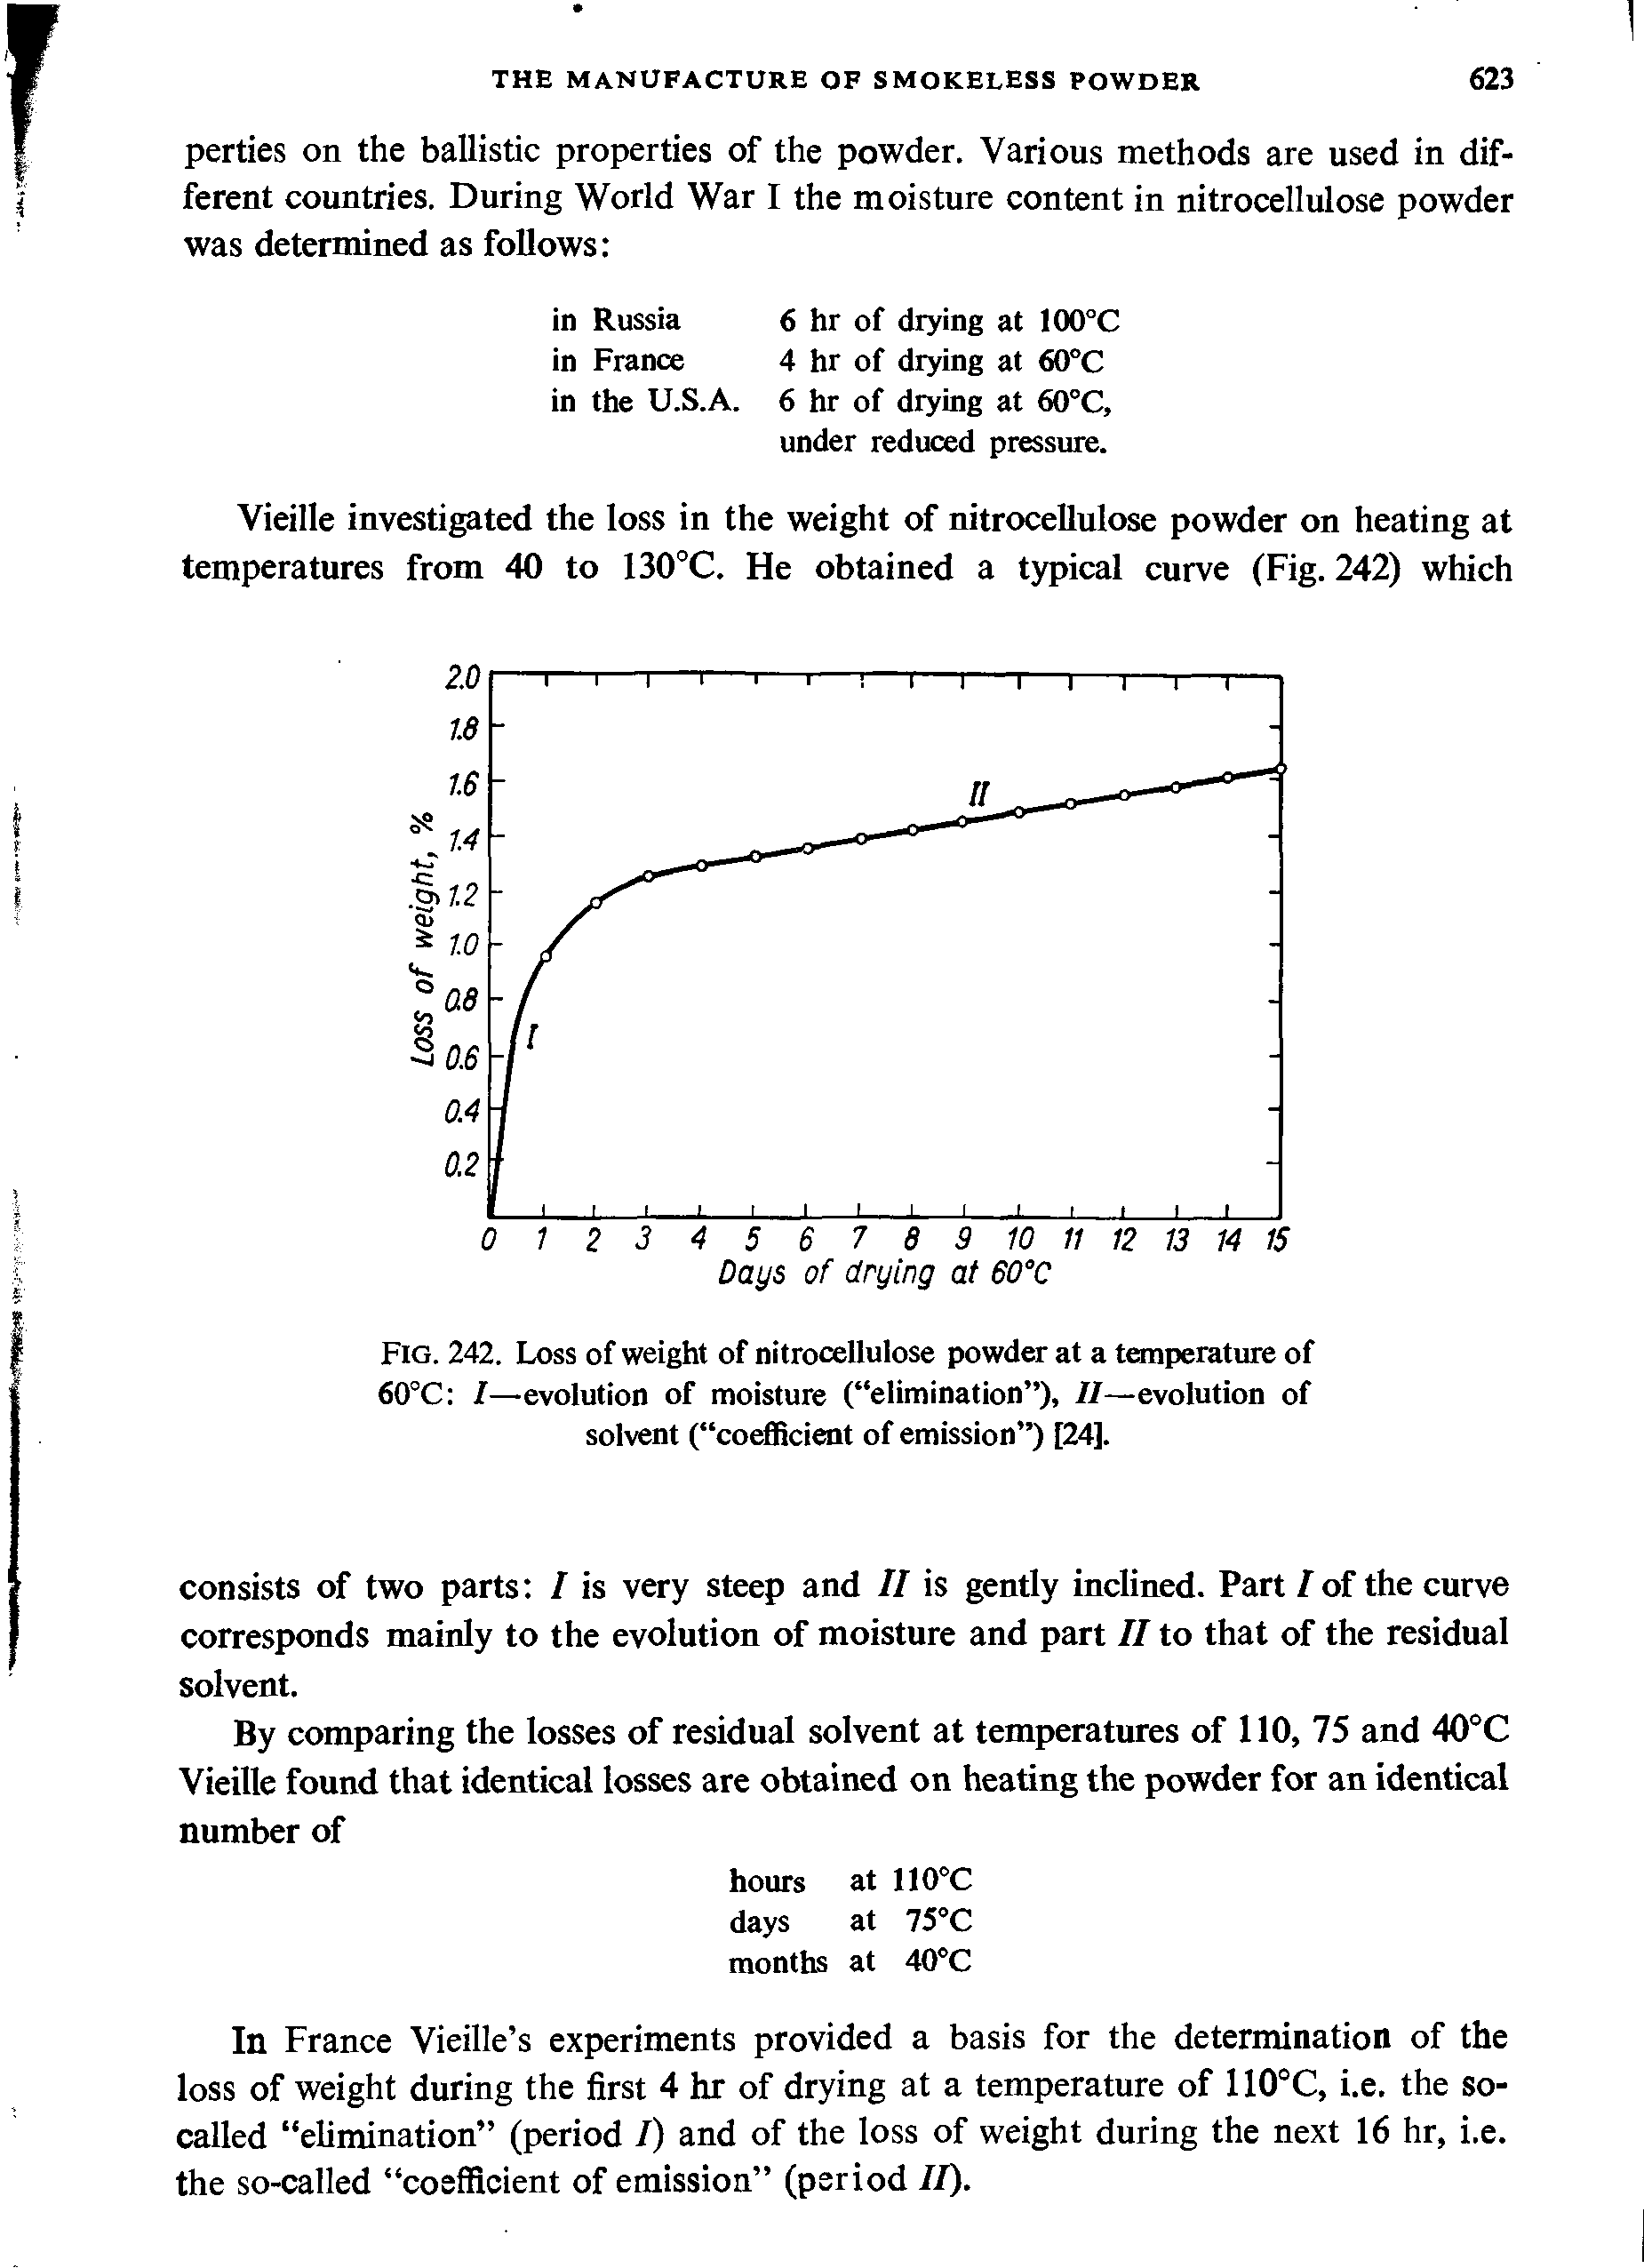 Fig. 242. Loss of weight of nitrocellulose powder at a temperature of 60°C I—evolution of moisture ( elimination ), II—evolution of solvent ( coefficient of emission ) [24].